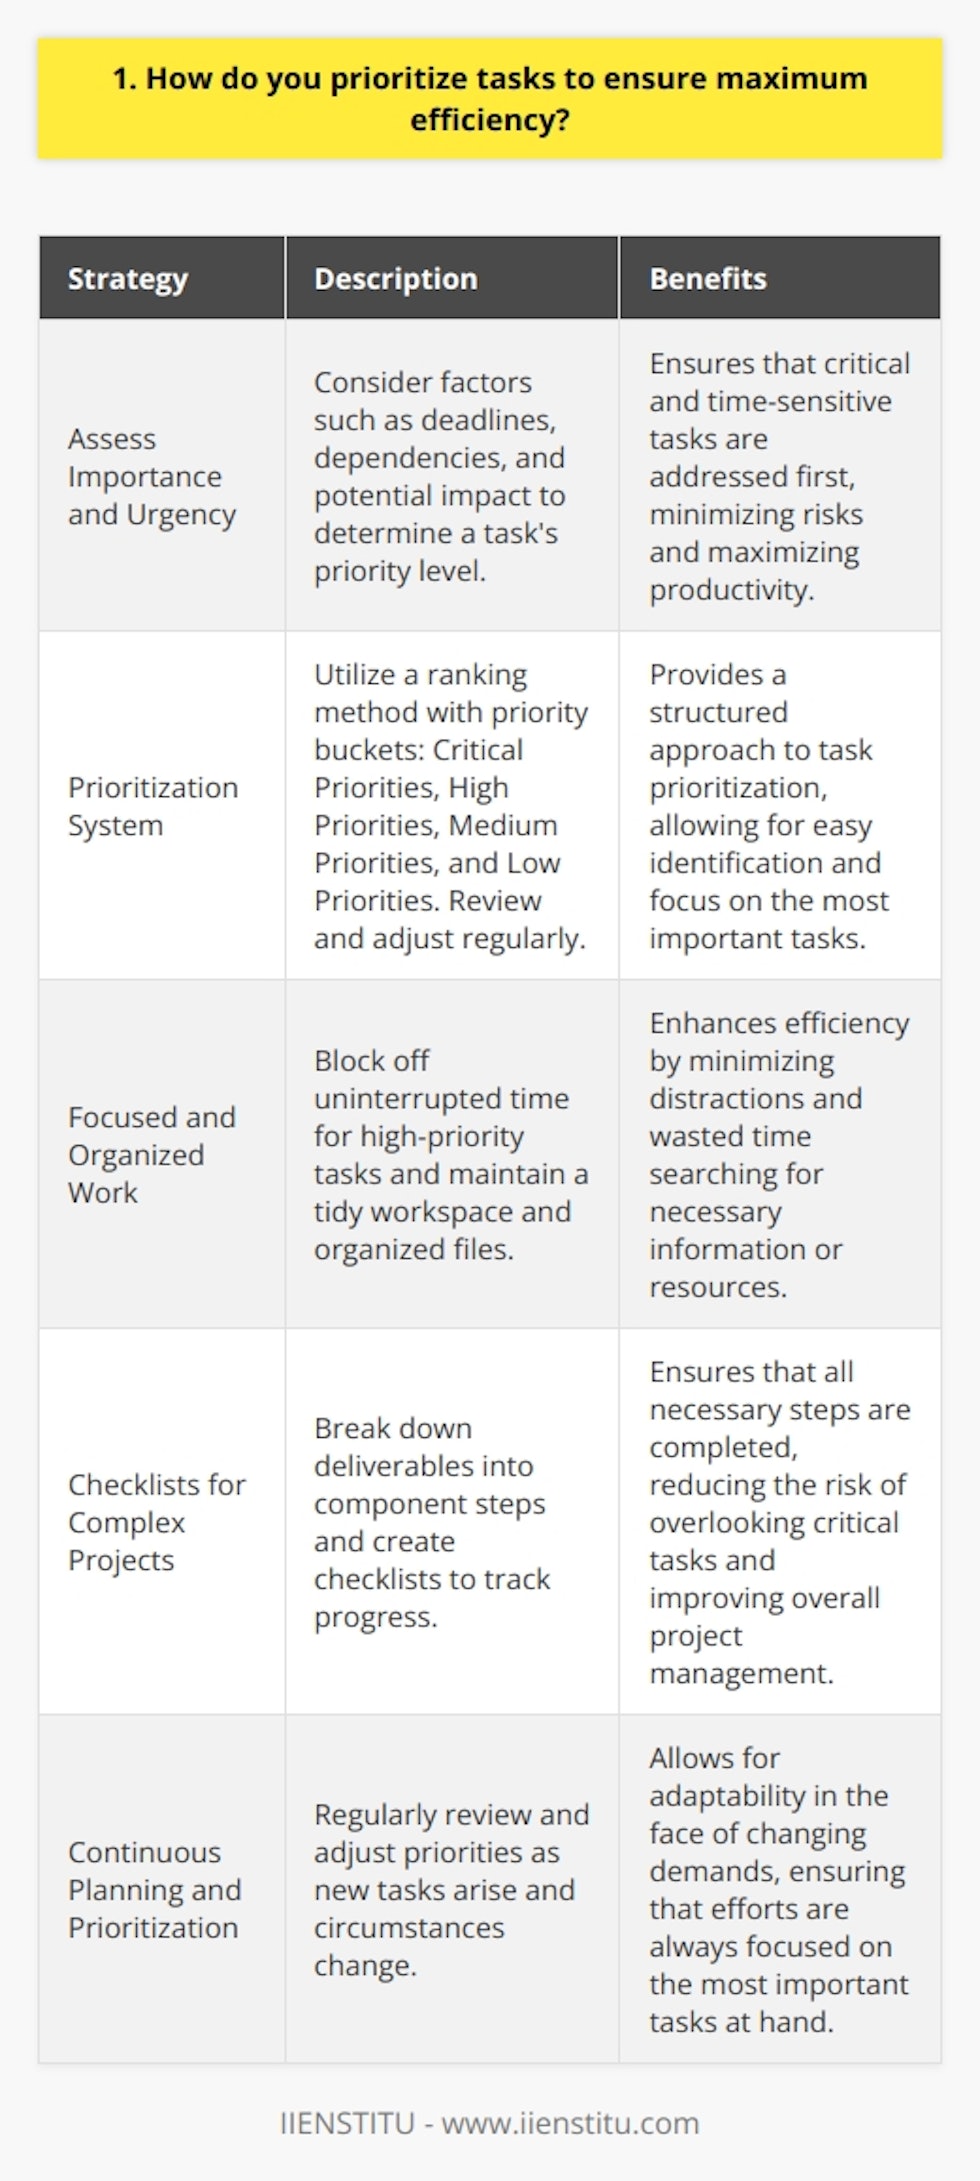 When prioritizing tasks, I focus on the most critical and time-sensitive items first. I assess each tasks importance and urgency, then create a prioritized to-do list. Assessing Importance and Urgency To determine a tasks priority level, I consider factors like deadlines, dependencies, and potential impact. Tasks with approaching due dates, those blocking other work, and high-impact items get moved to the top. My Prioritization System Ive developed my own simple ranking method: I review and adjust these priority buckets regularly as new tasks come in and circumstances change. Staying Focused and Organized Efficiency also requires focus and organization. I block off uninterrupted time for high-priority deep work. Keeping my workspace tidy and files organized saves valuable minutes every day. The Power of Checklists For complex projects, nothing beats a good old-fashioned checklist. Breaking deliverables down into component steps keeps me on track. Overall, a bit of planning and conscious prioritization keeps me delivering maximum value and meeting key objectives. Its a simple system, but mastering the fundamentals makes all the difference.